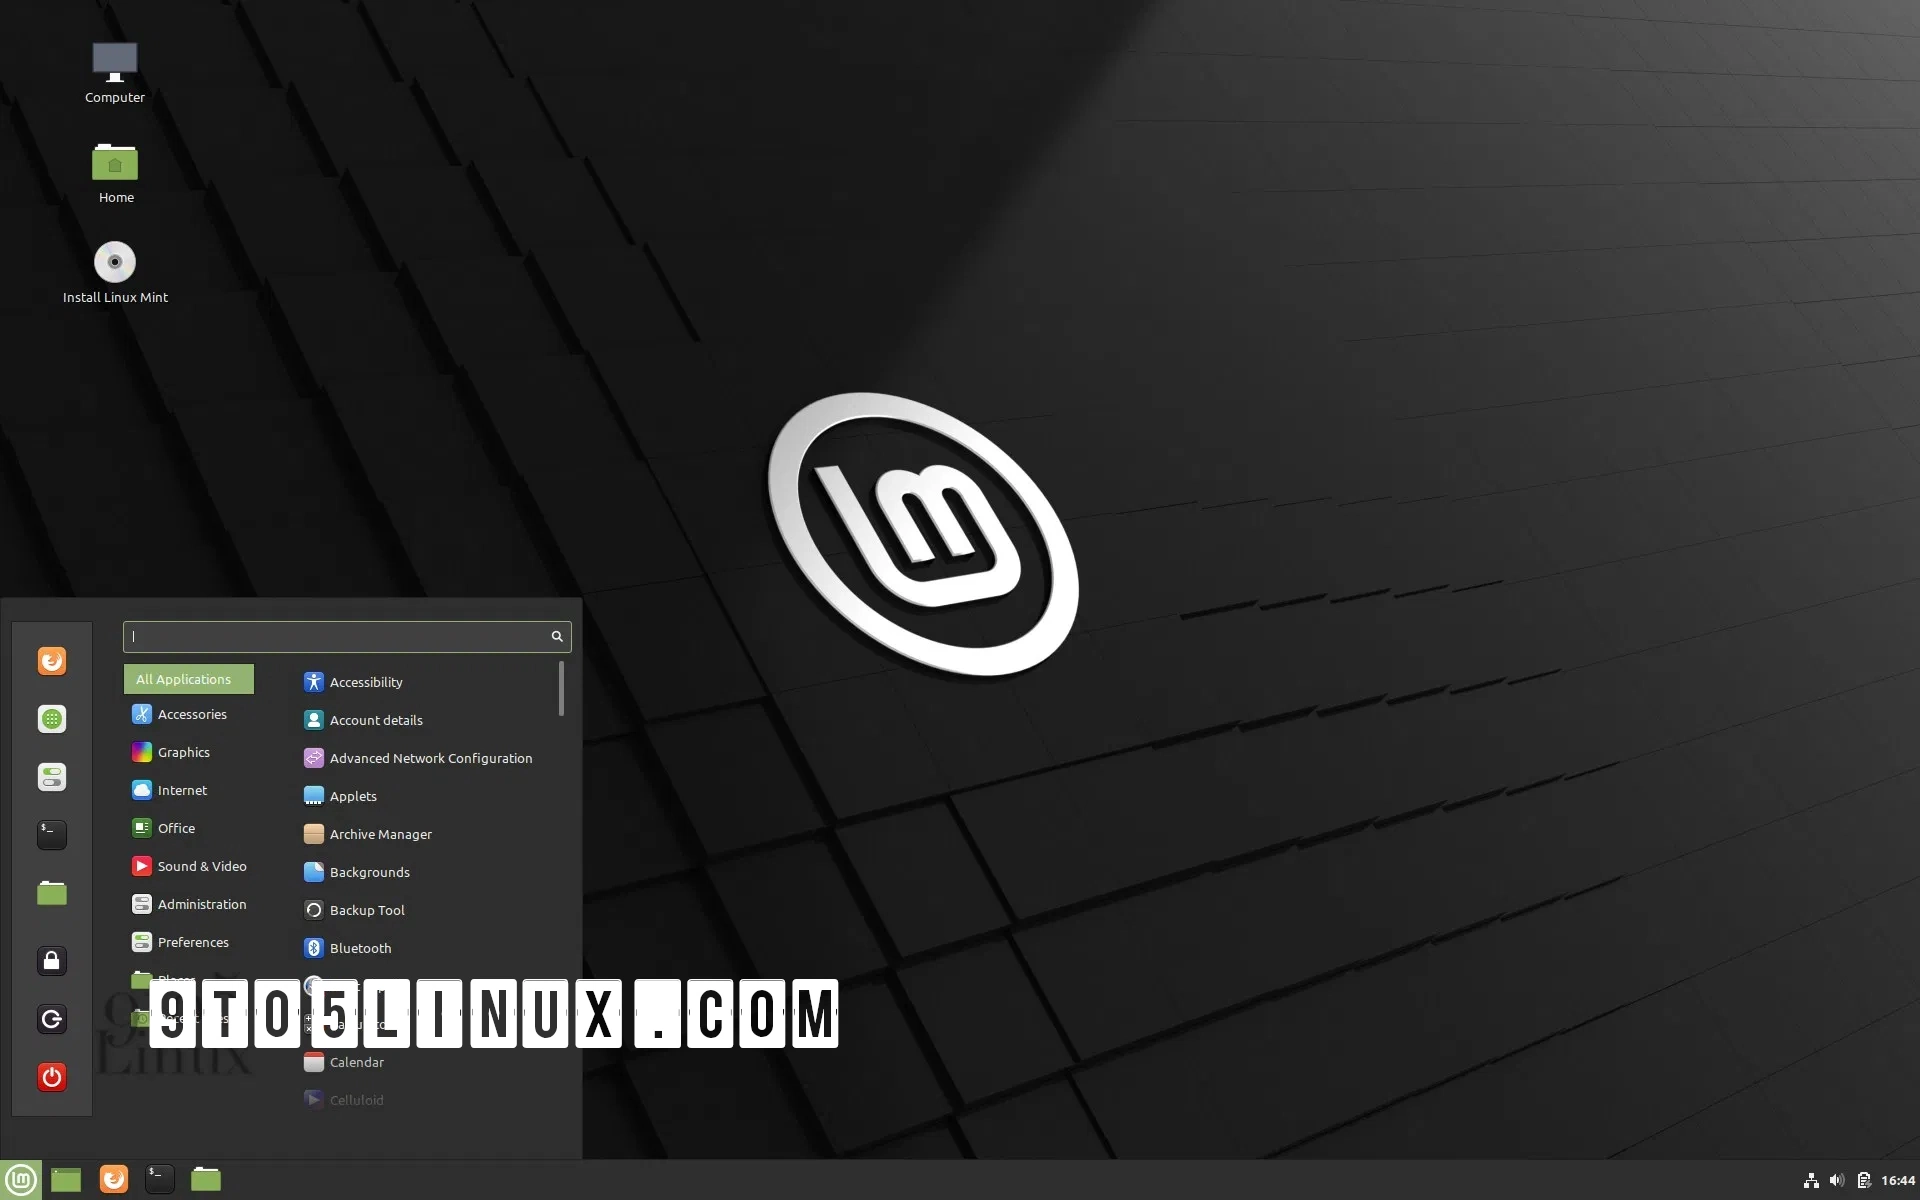 Linux Mint 20.3 “Una” Arrives This Christmas with Dark Apps and Other Visual Changes